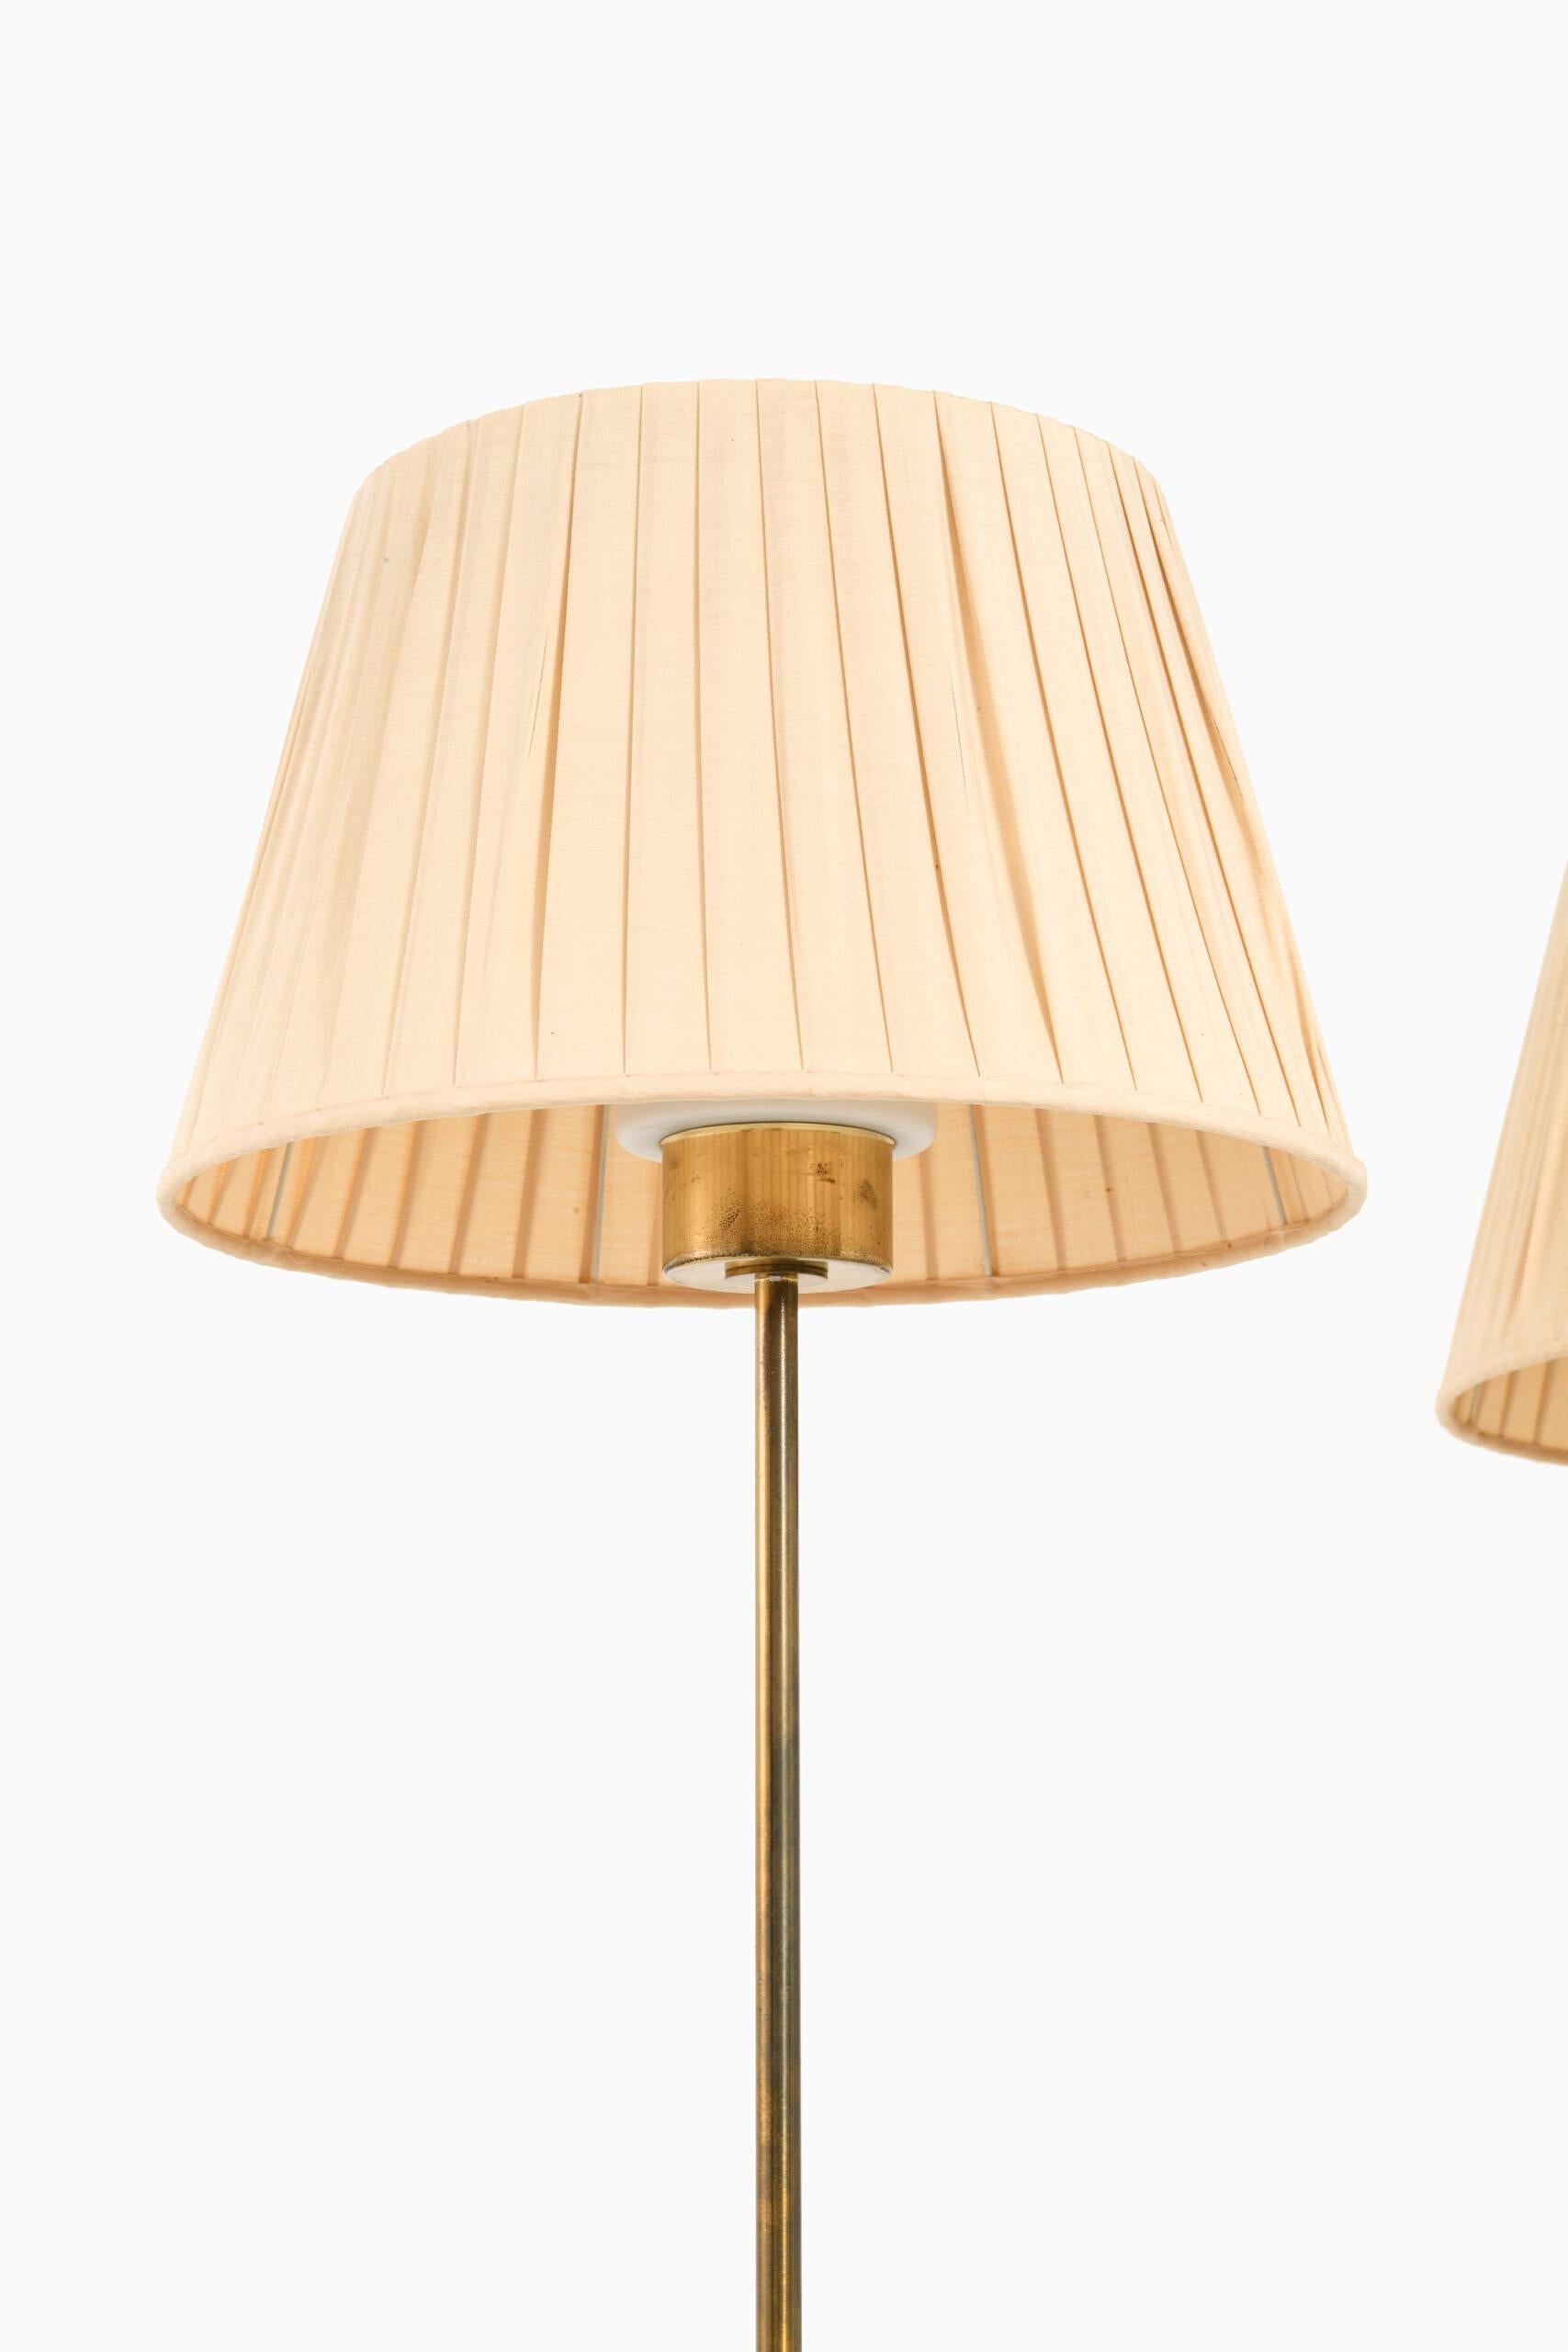 Rare pair of floor lamps model G-50 designed by Hans-Agne Jakobsson. Produced by Hans-Agne Jakobsson AB in Markaryd, Sweden.